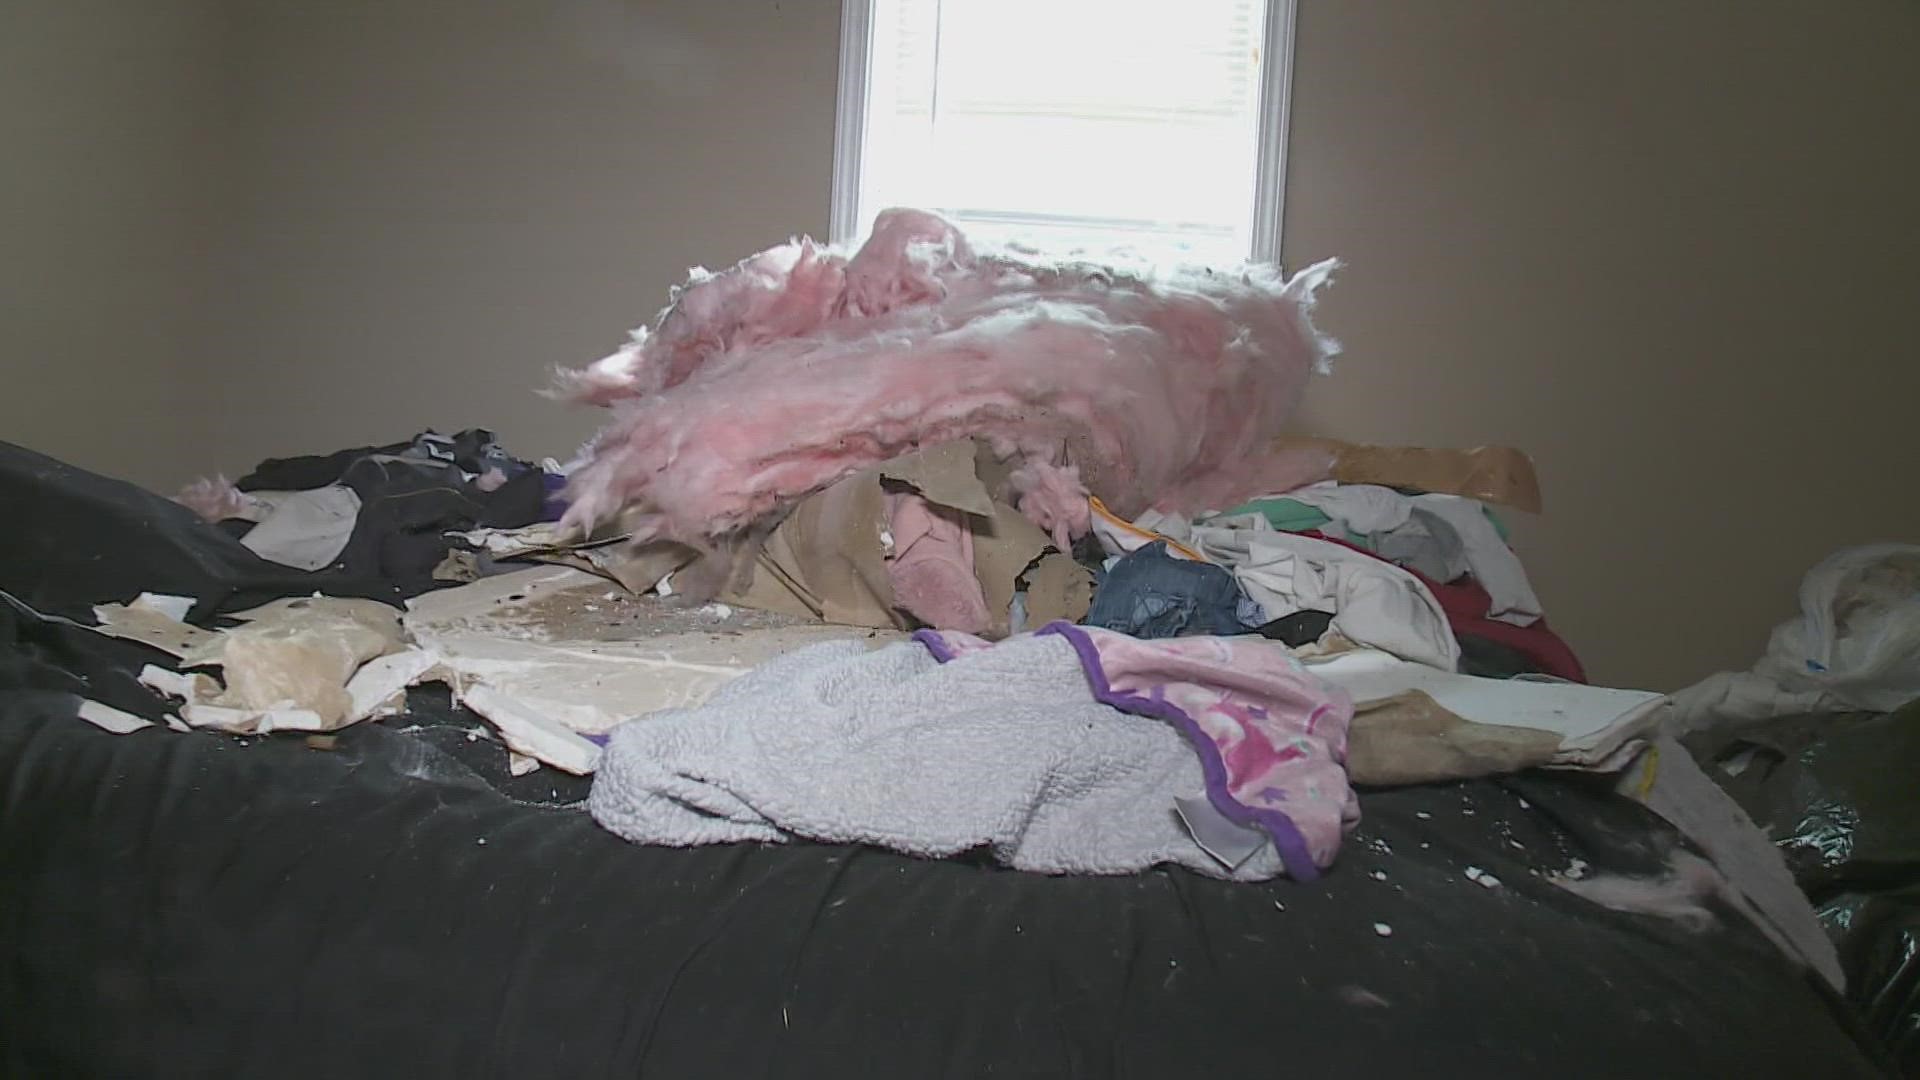 A family is trying to deal with the damage left after Ida on their own after their landlord has done nothing to assist them.